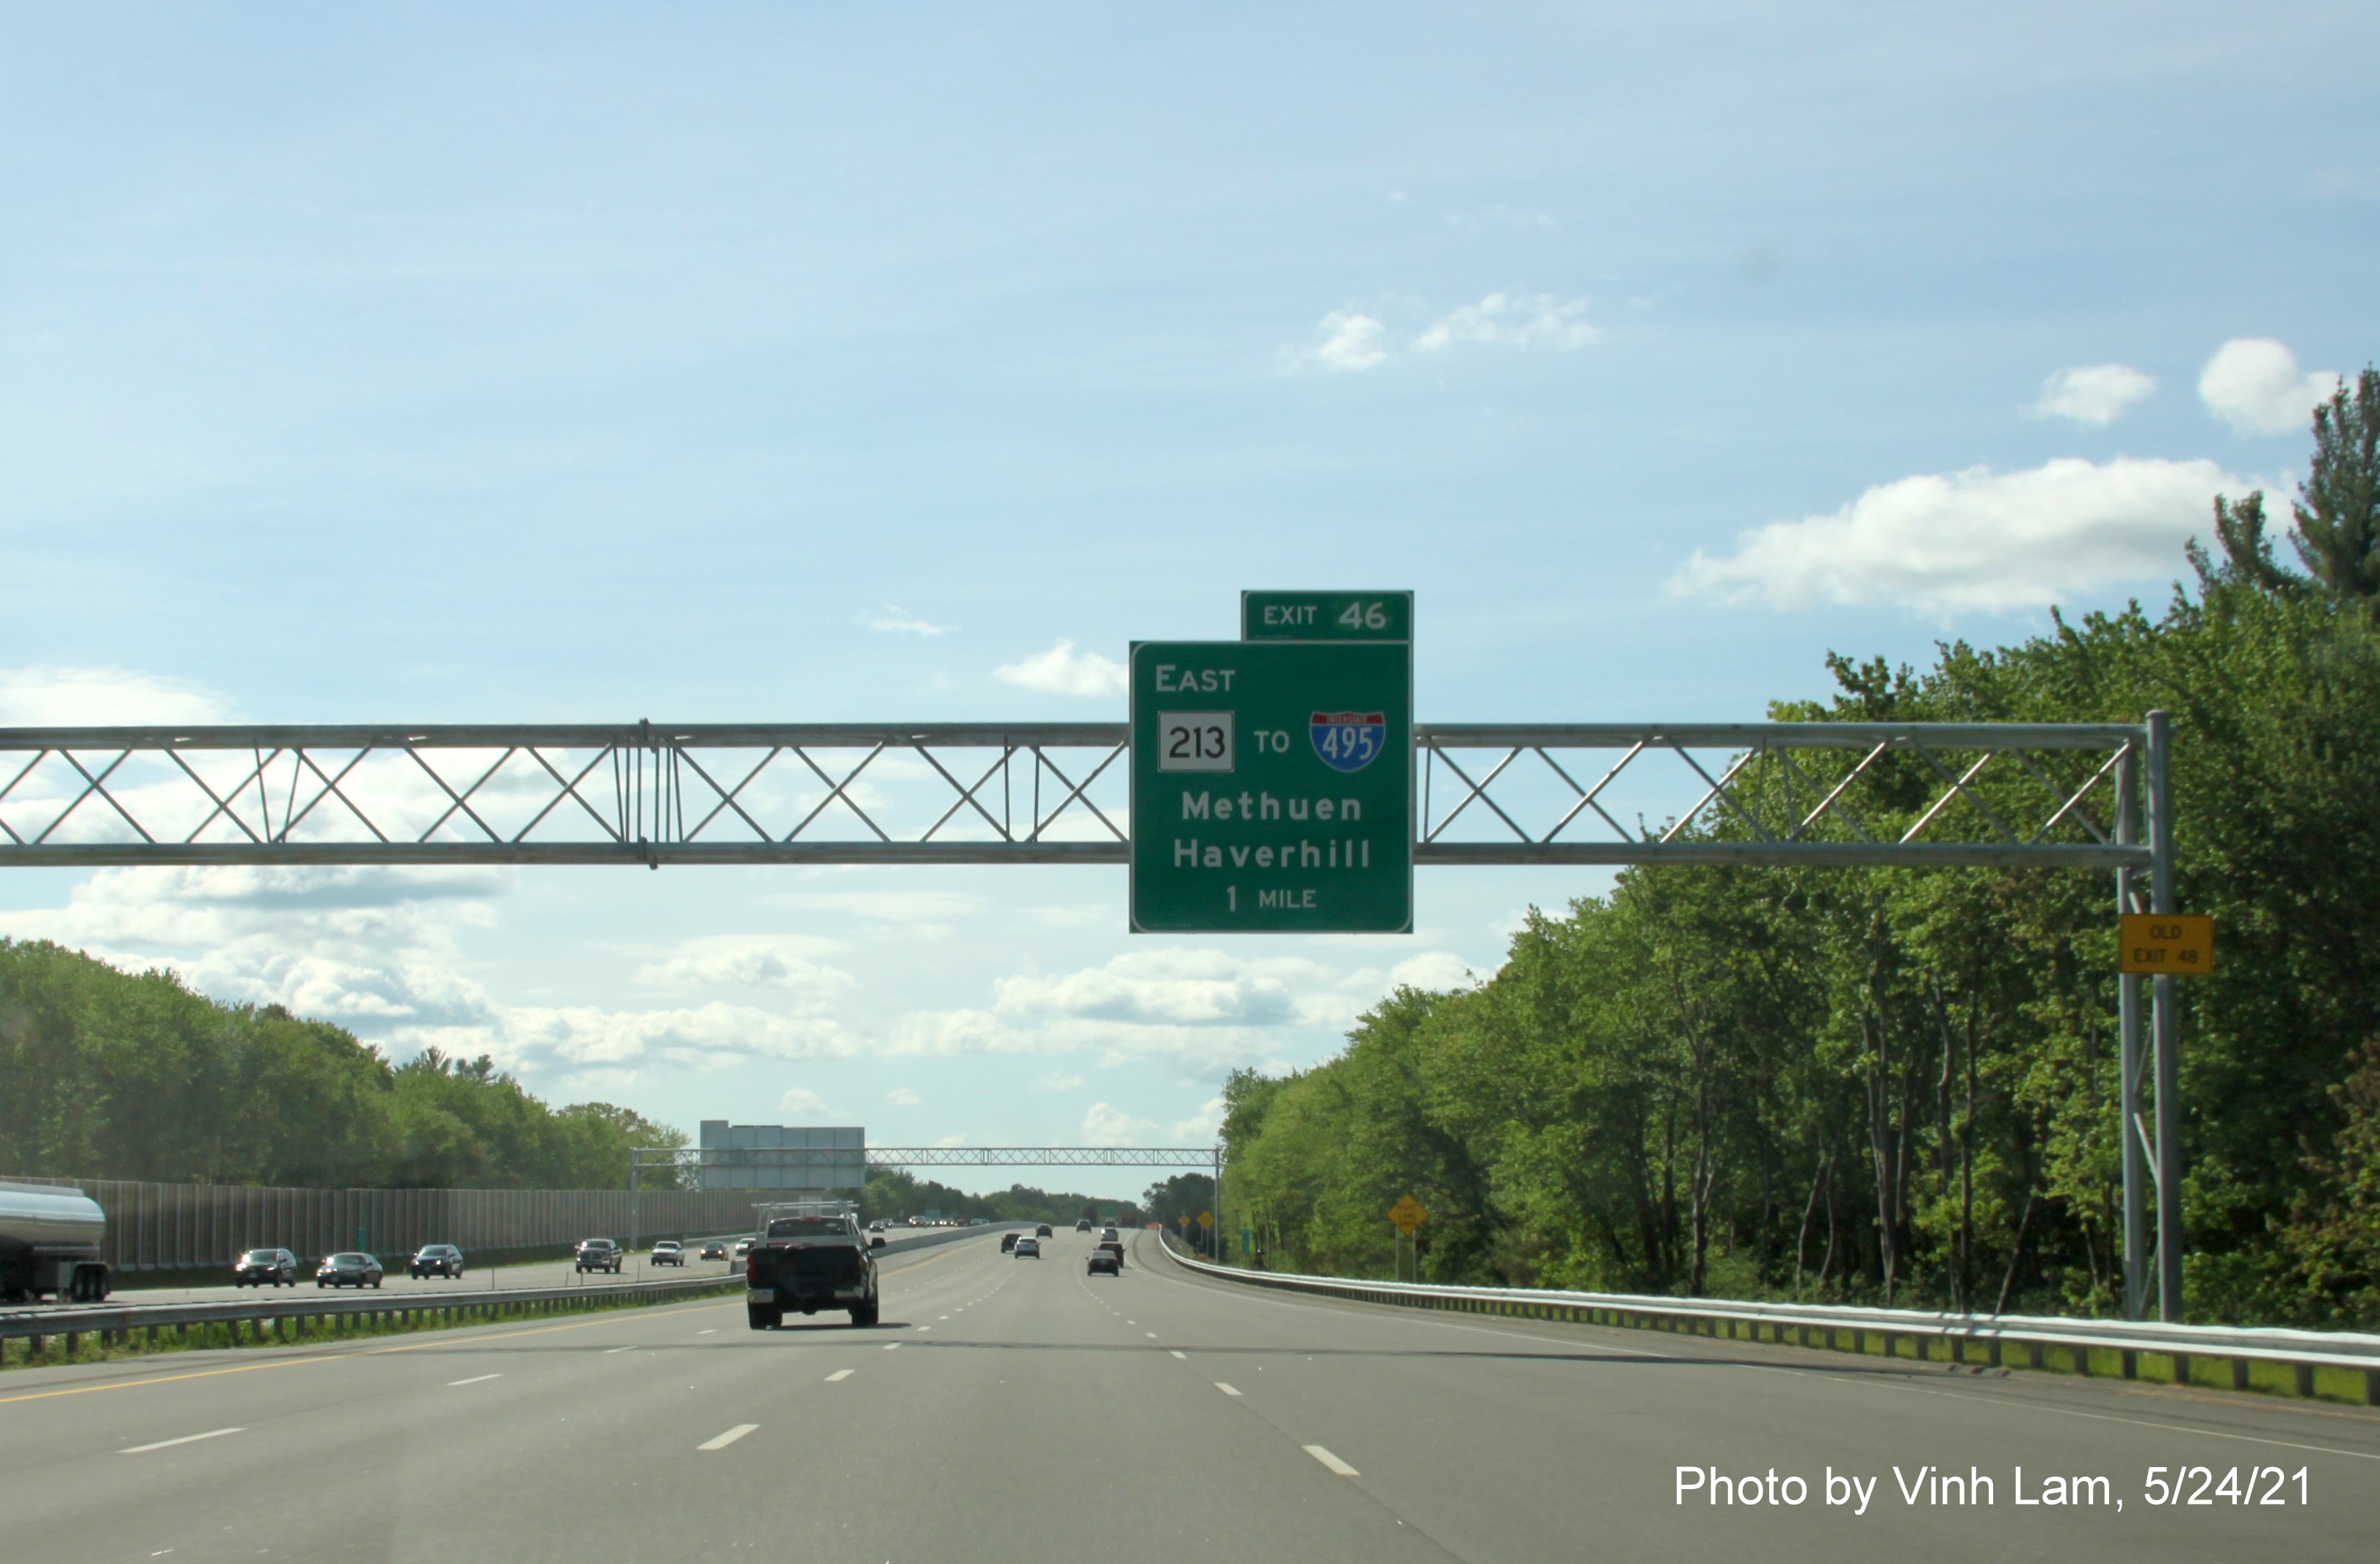 Image of 1 mile advance sign for MA 213 exit with new milepost based exit number and yellow Old Exit 48 advisory sign on right support on I-93 South in Methuen, by Vinh Lam, May 2021